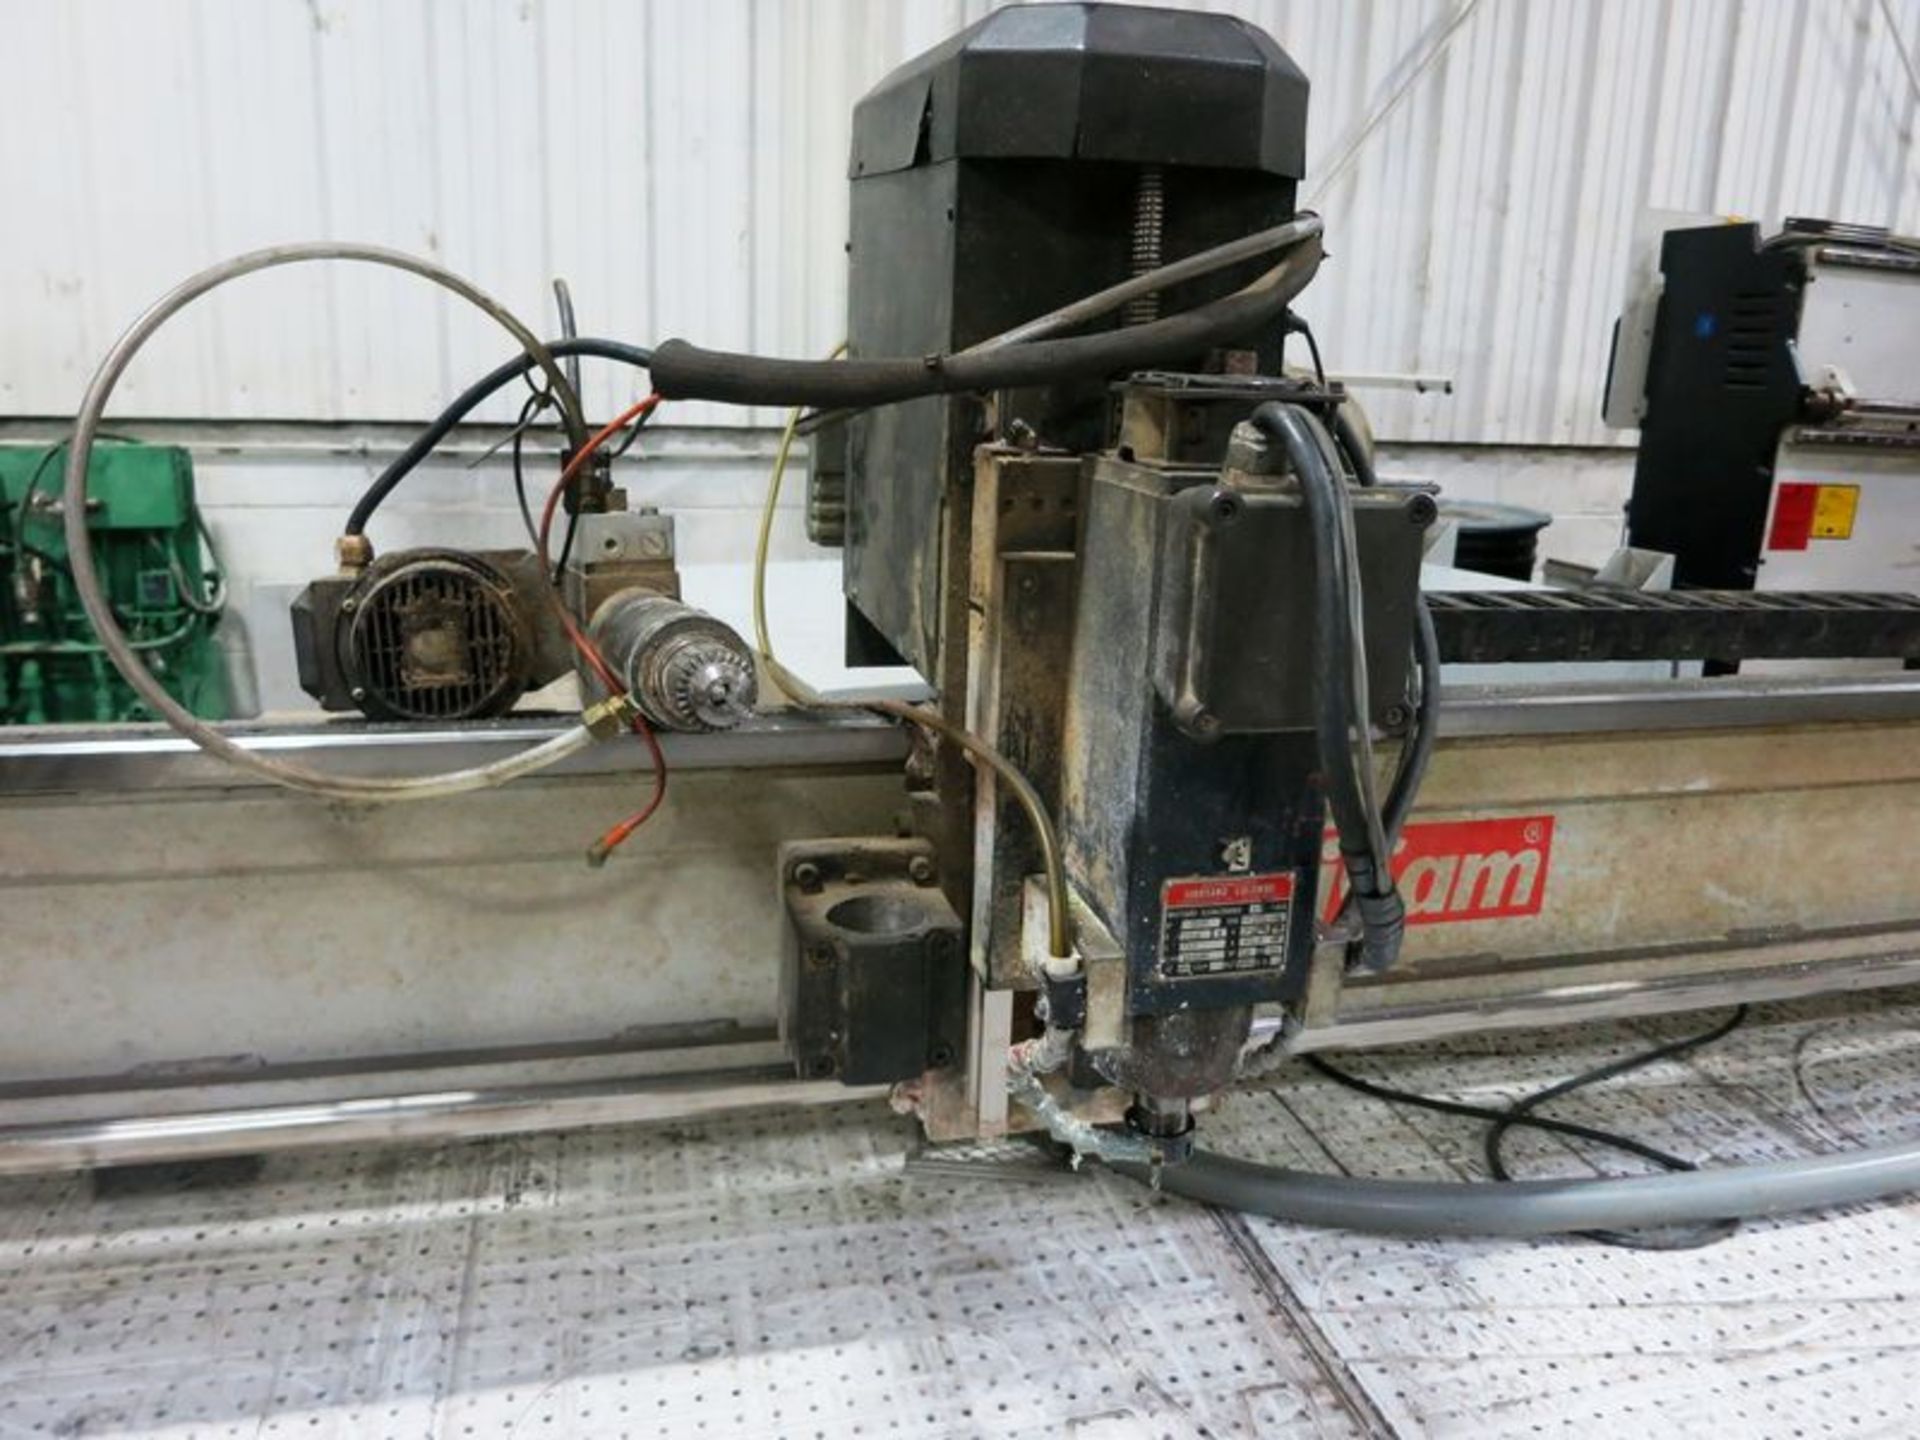 8'X10' Multicam Pro Seris Pro 302 CNC Router, S/N 51591, New 1999 General Specifications, Table 8' - Image 3 of 14